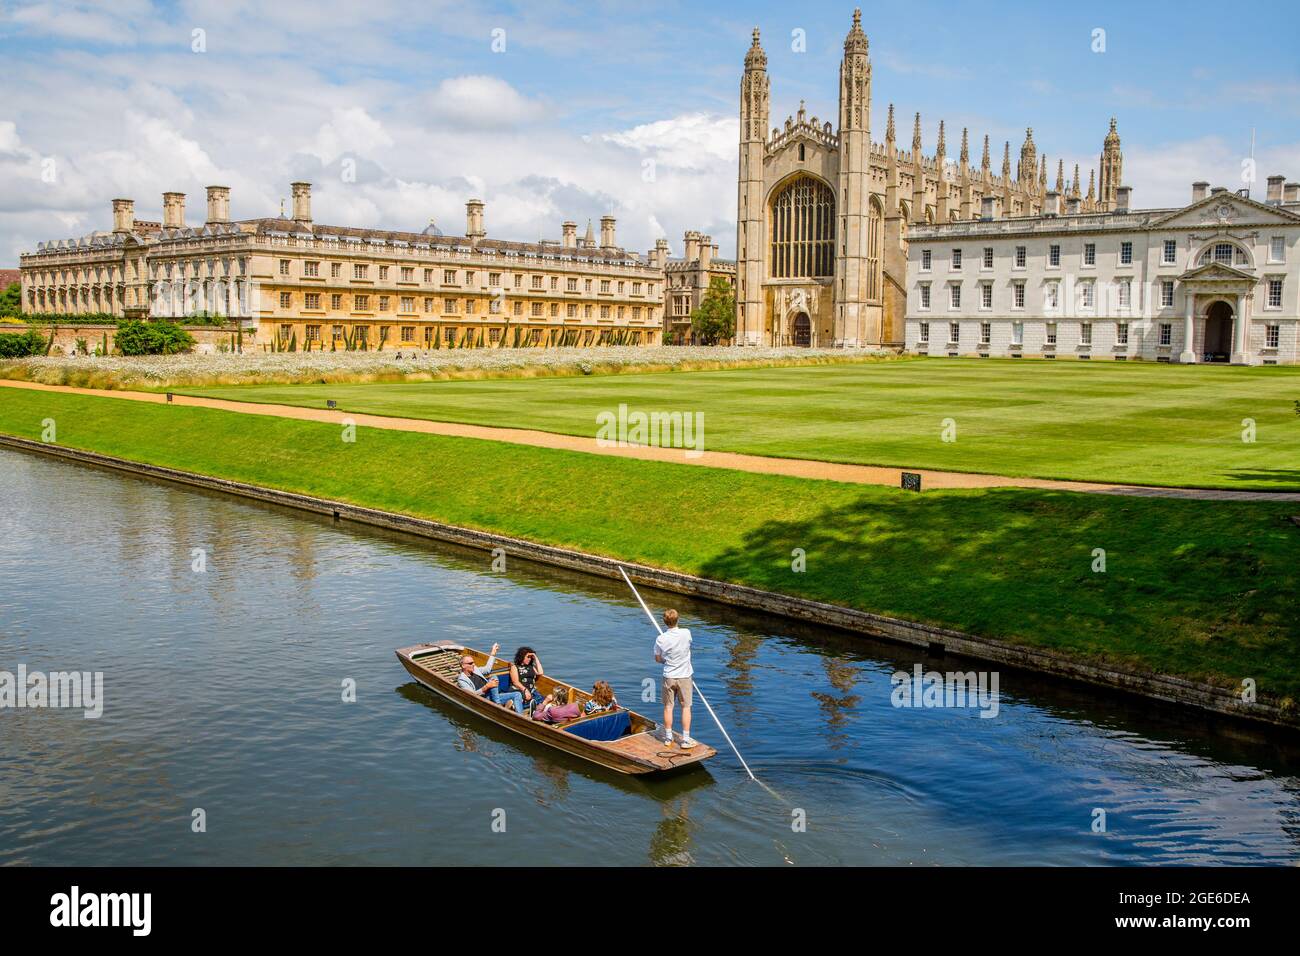 King's College chapel and punting along the river Cam, Cambridge Stock Photo